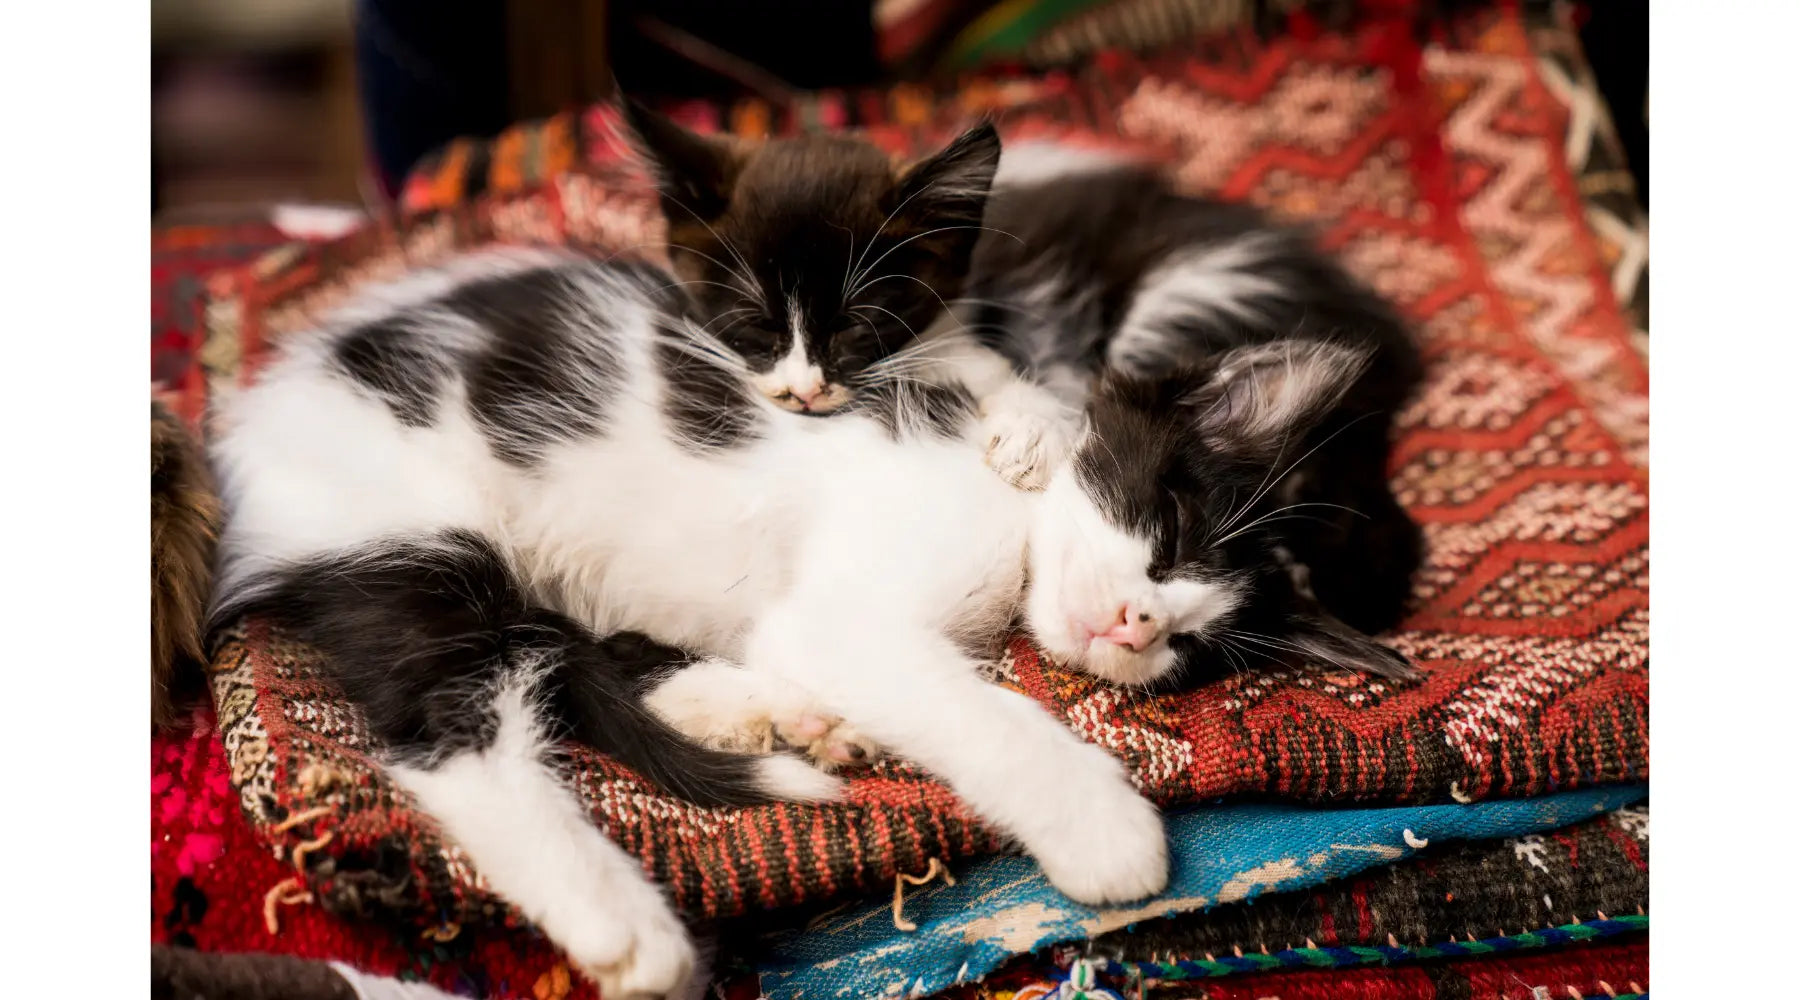 two-kittens-cuddle-and-sleep-on-moroccan-rugs